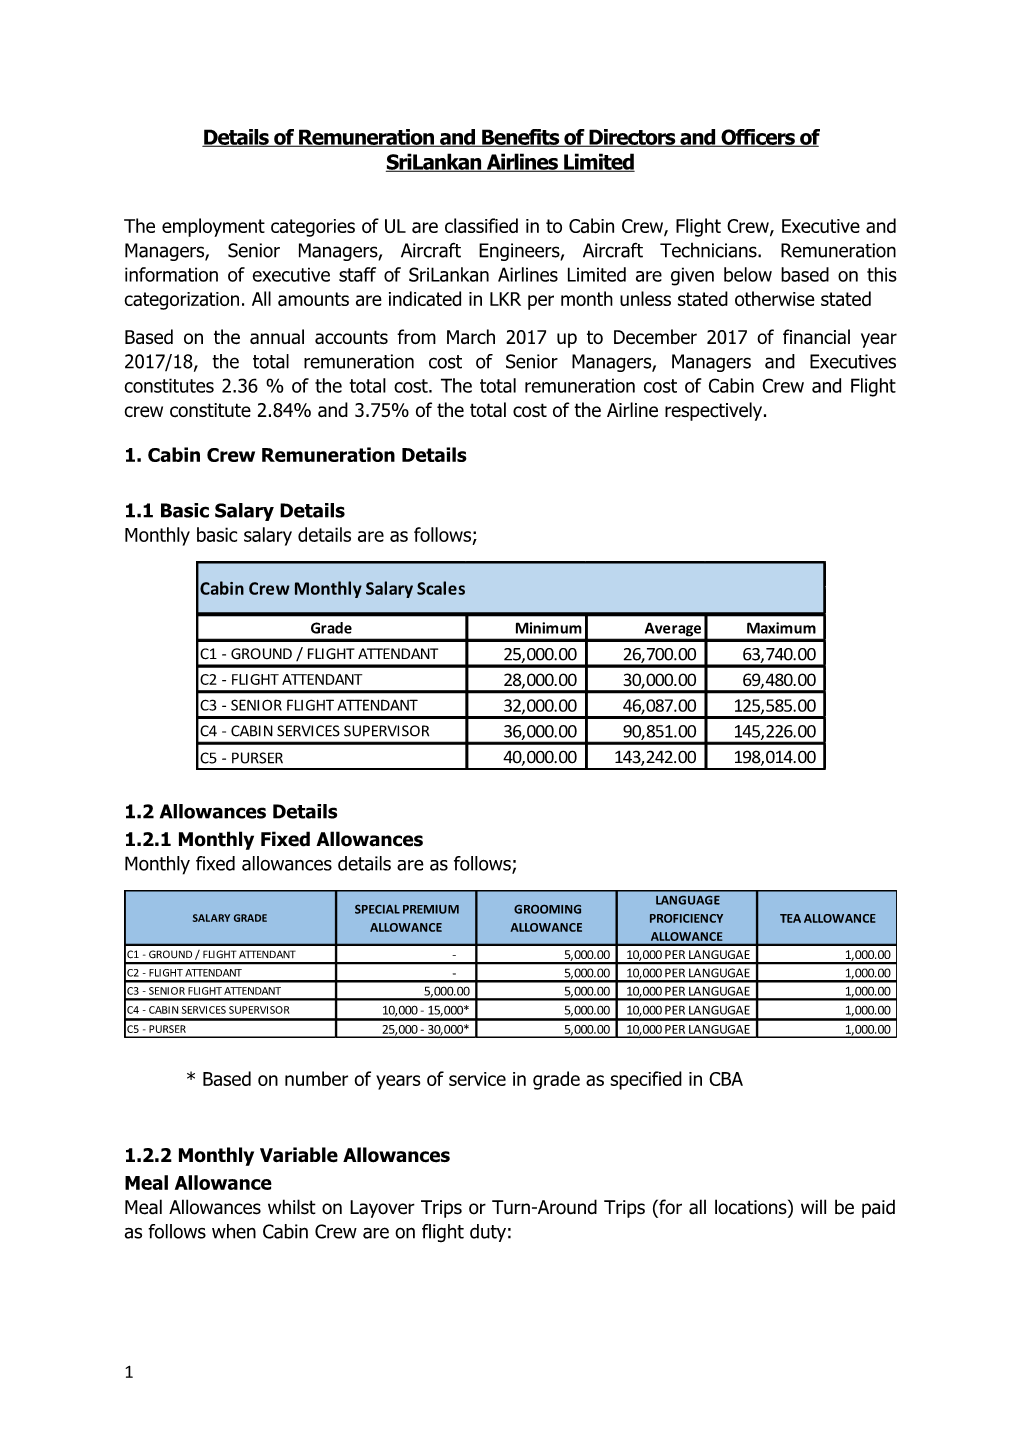 Details of Remuneration and Benefits of Directors and Officers of Srilankan Airlines Limited